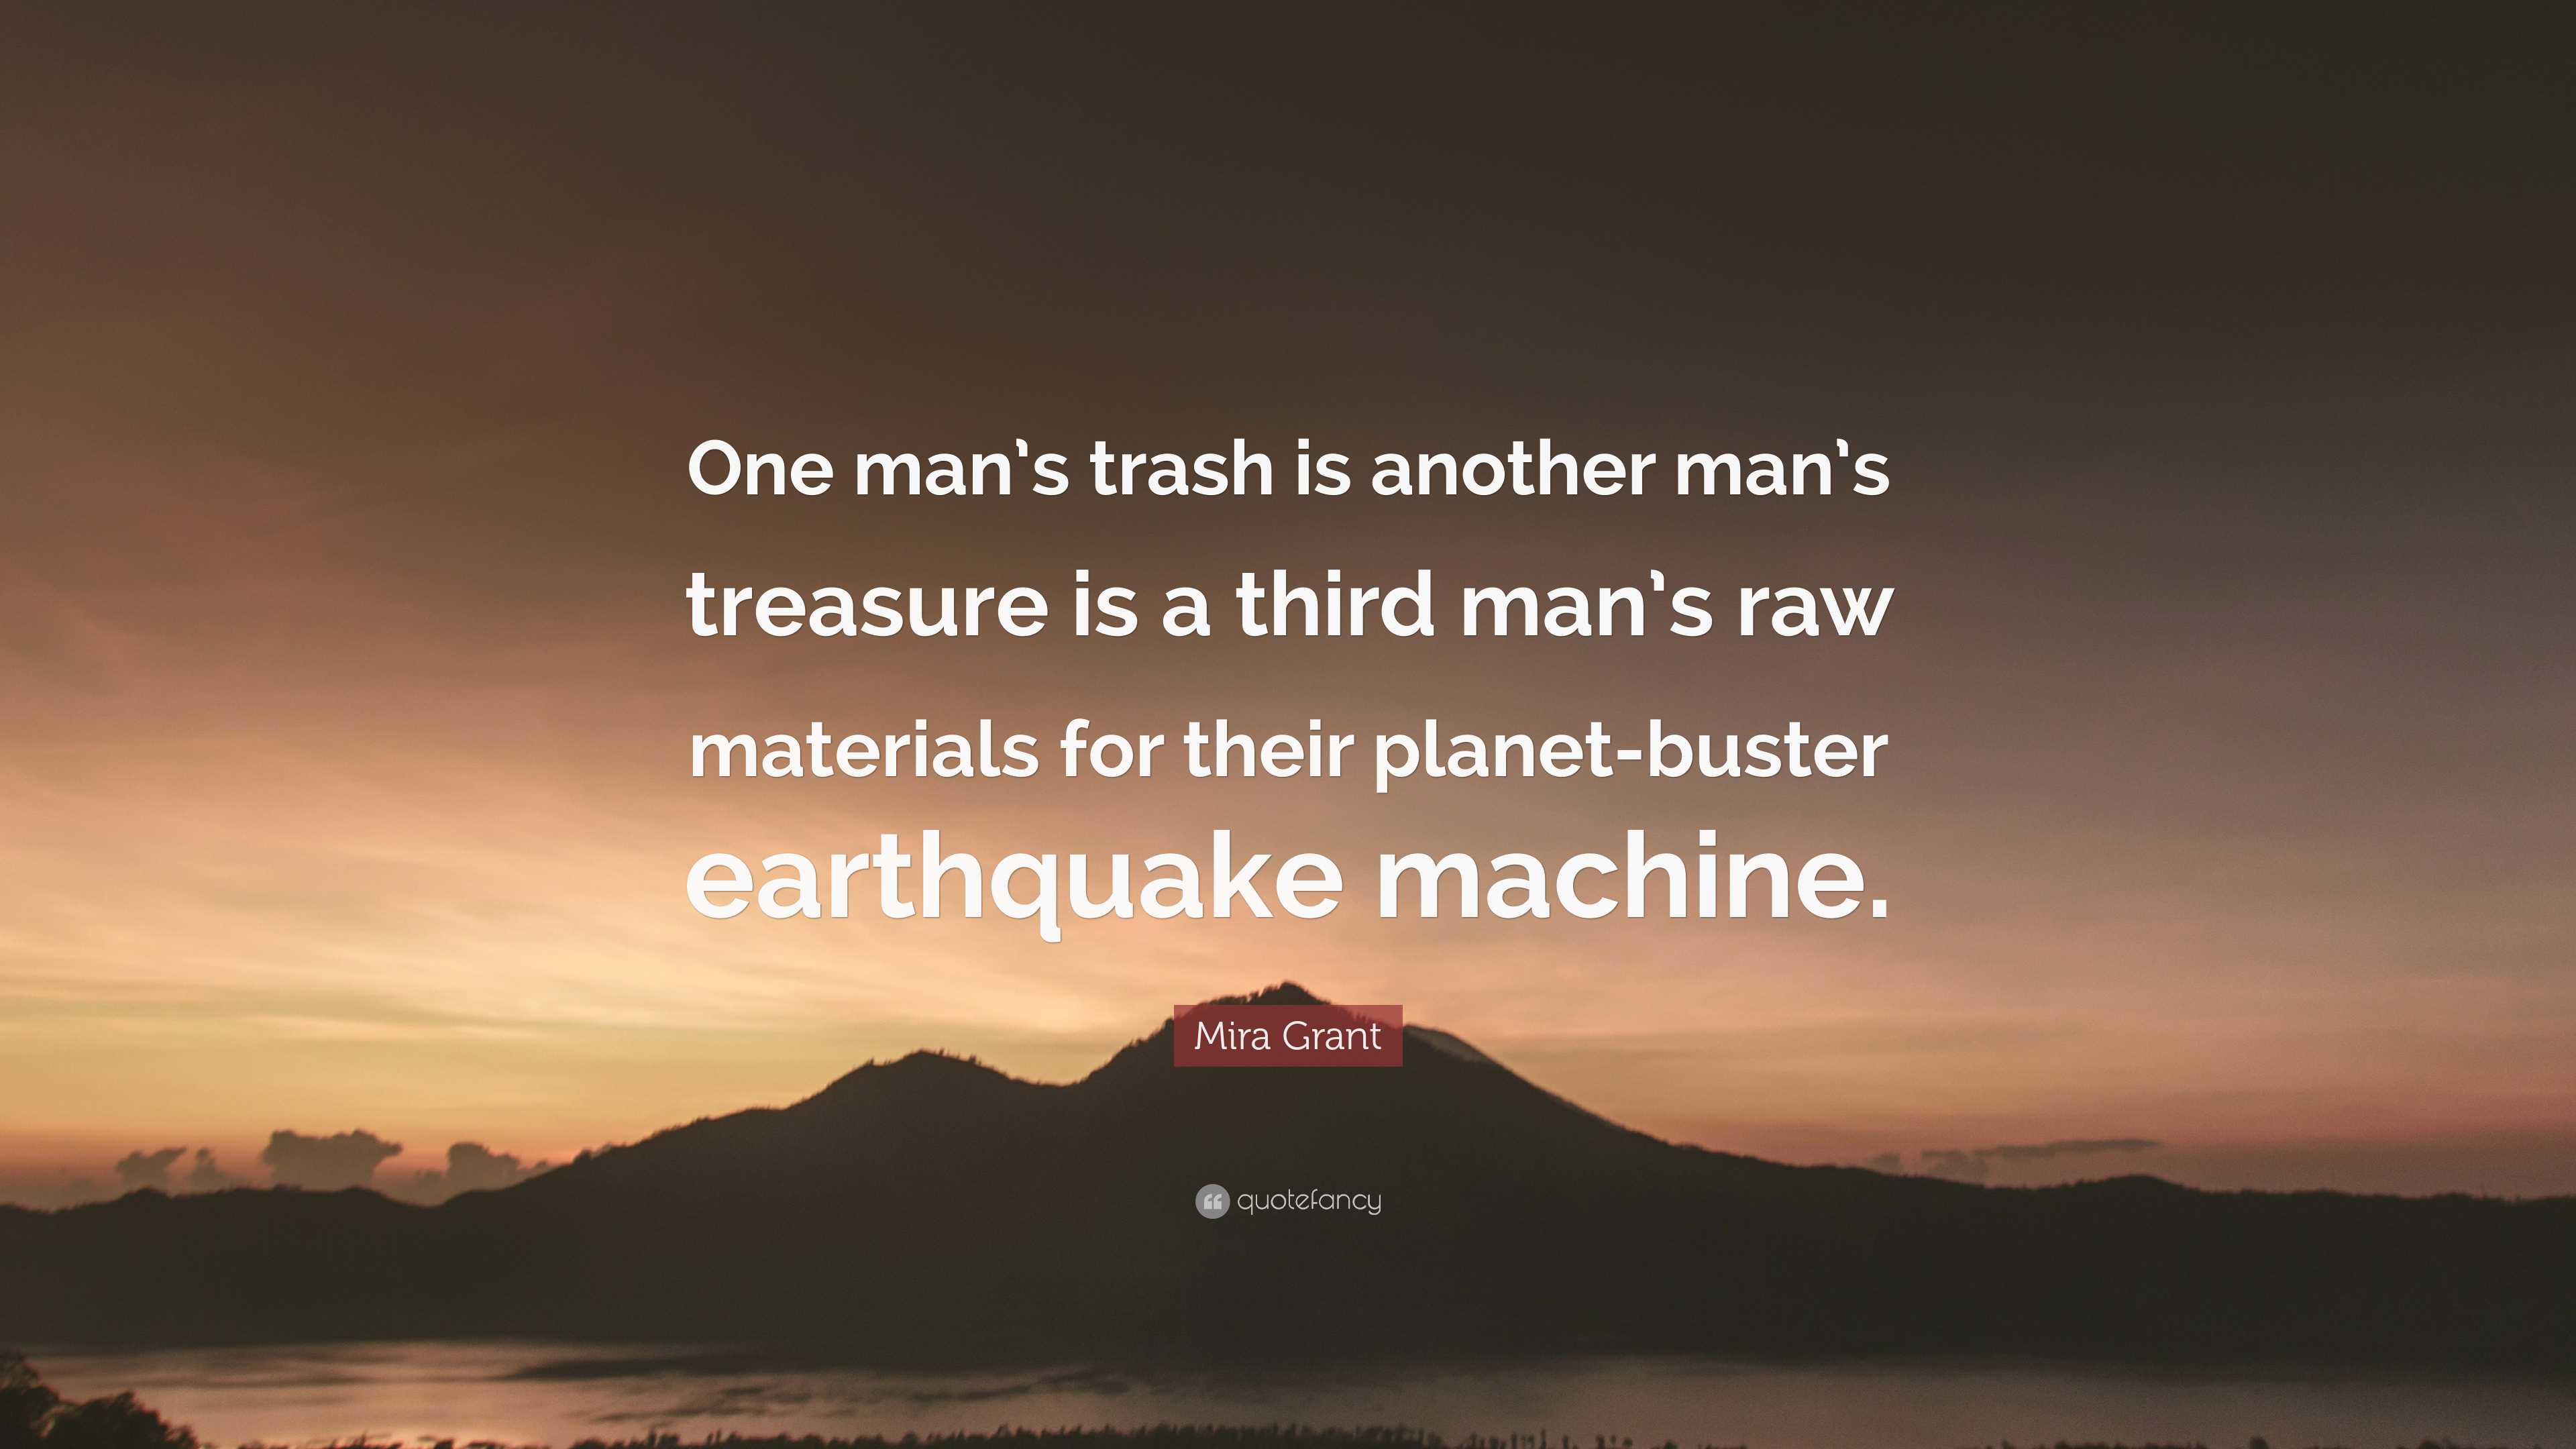 Quote/Counterquote: One man's – or woman's – trash is another's treasure